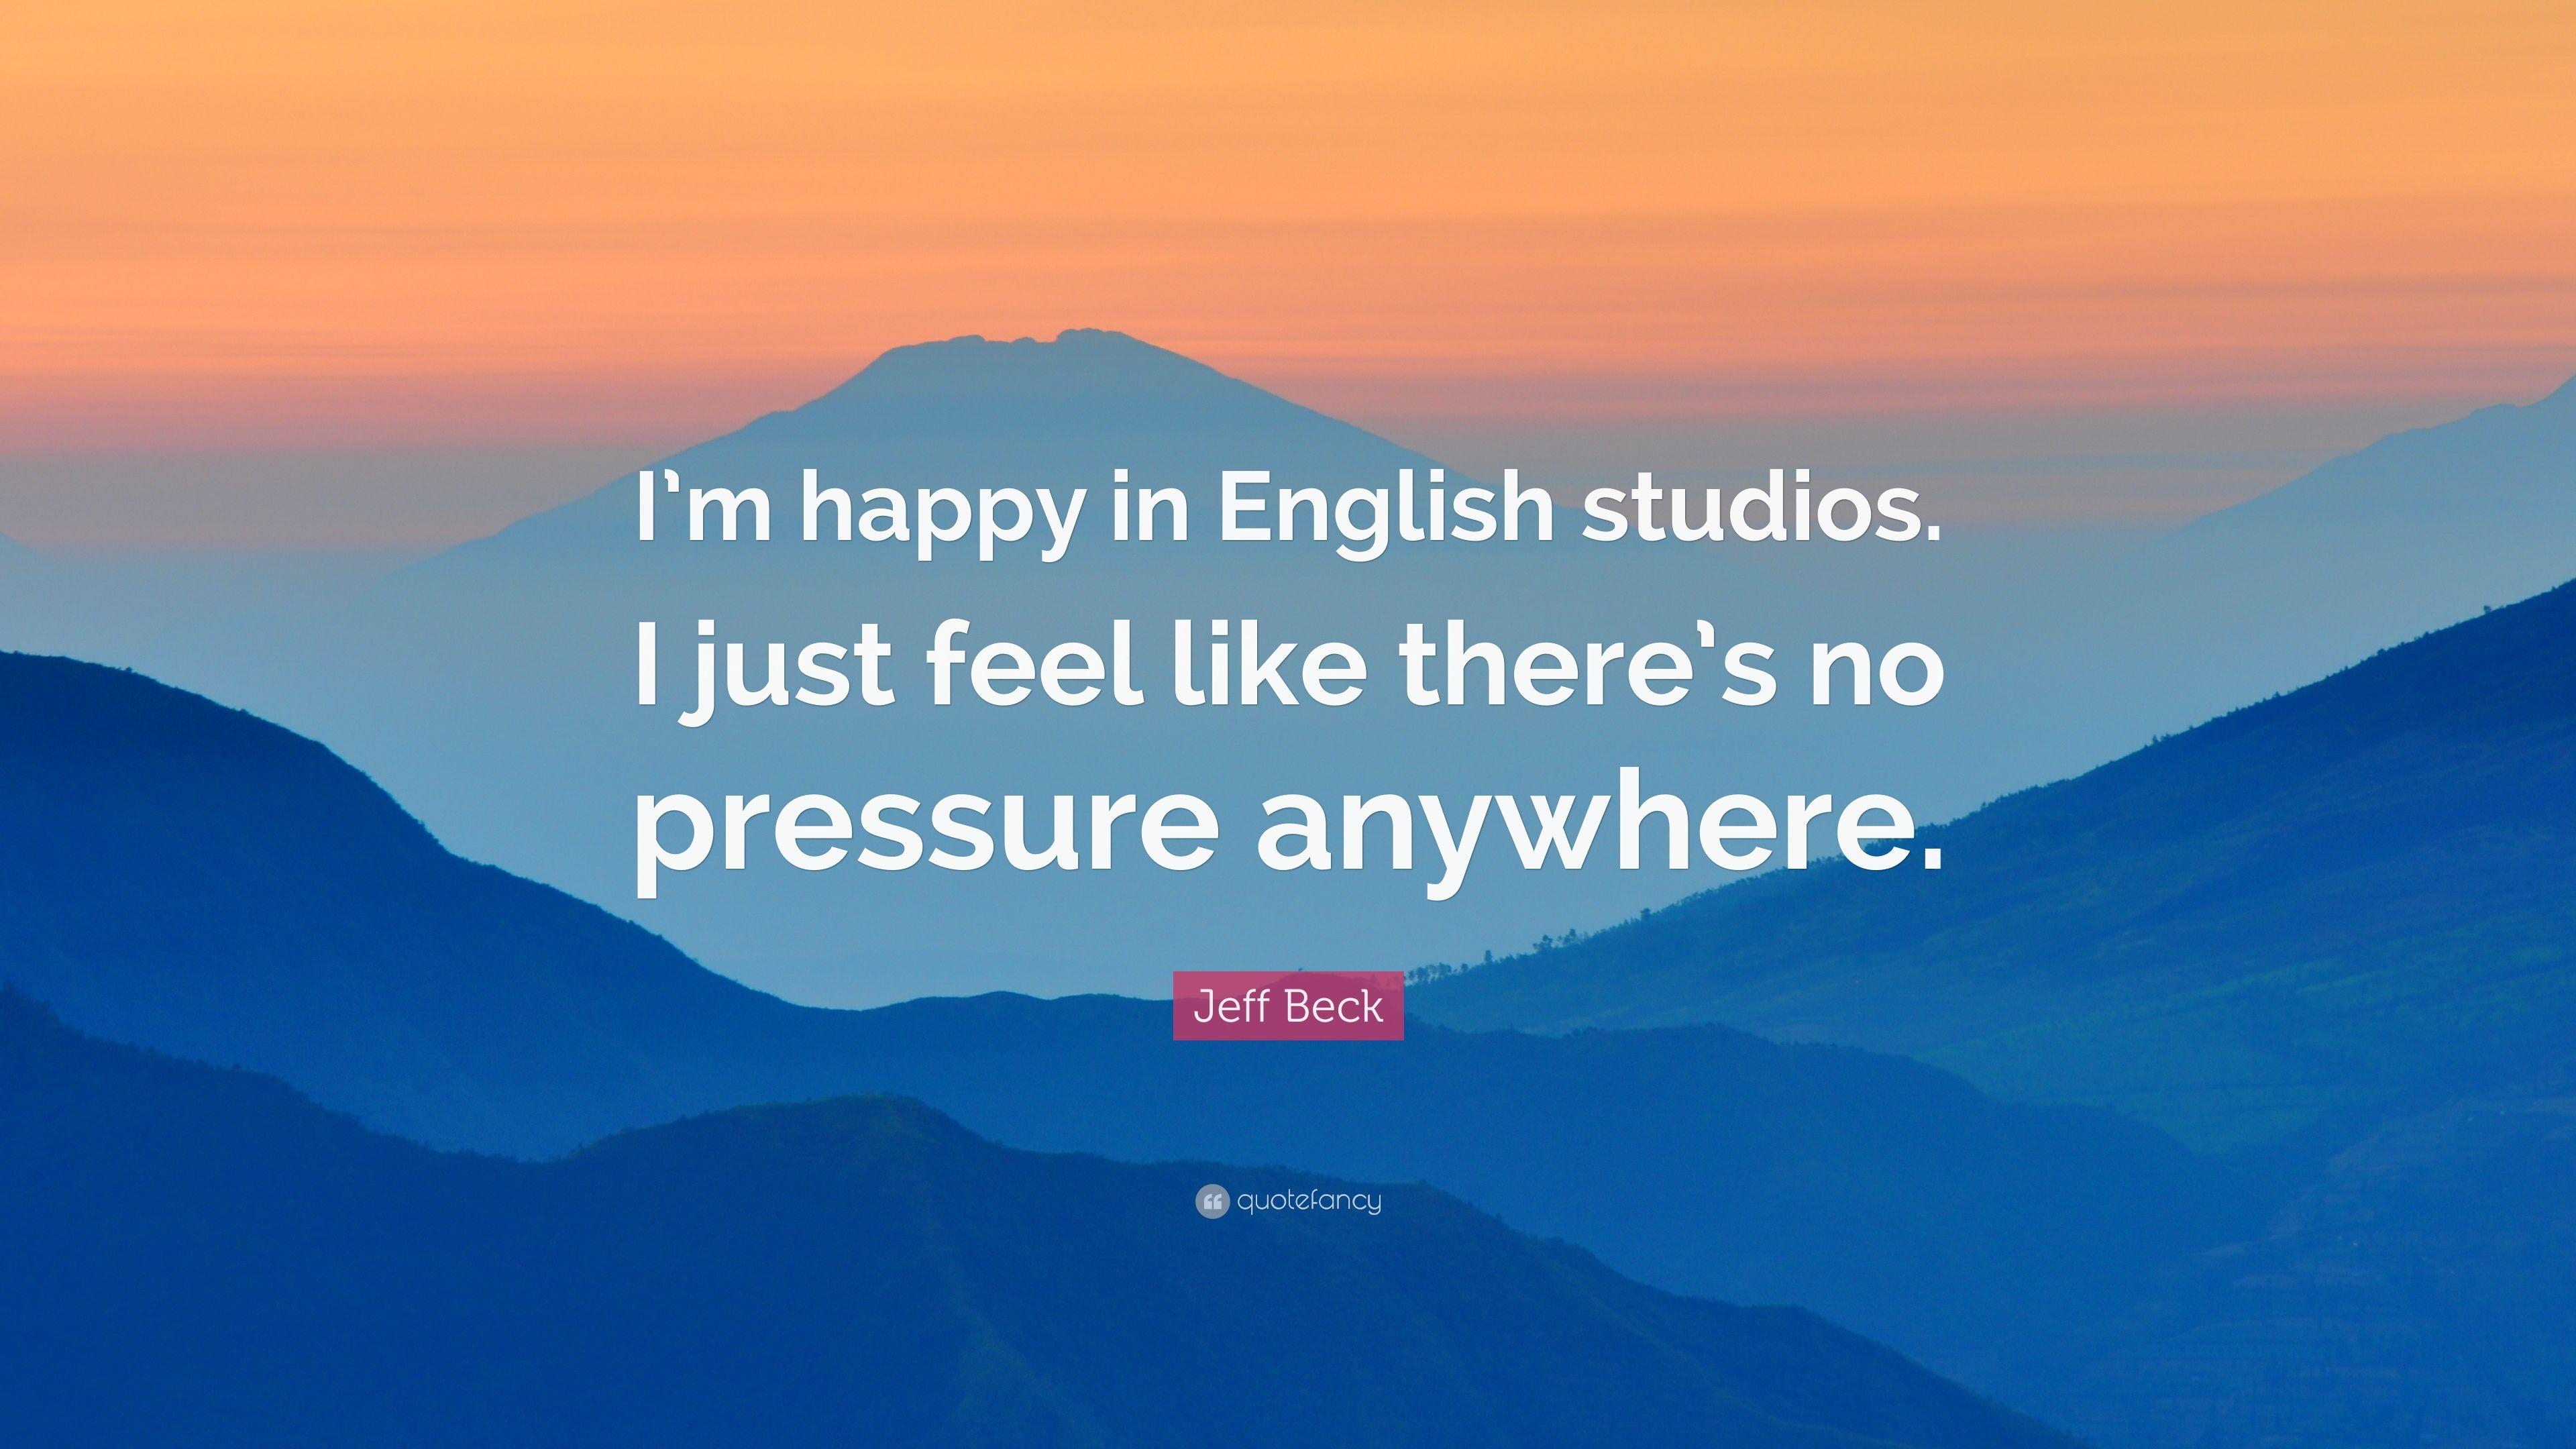 Jeff Beck Quote: “I'm happy in English studios. I just feel like